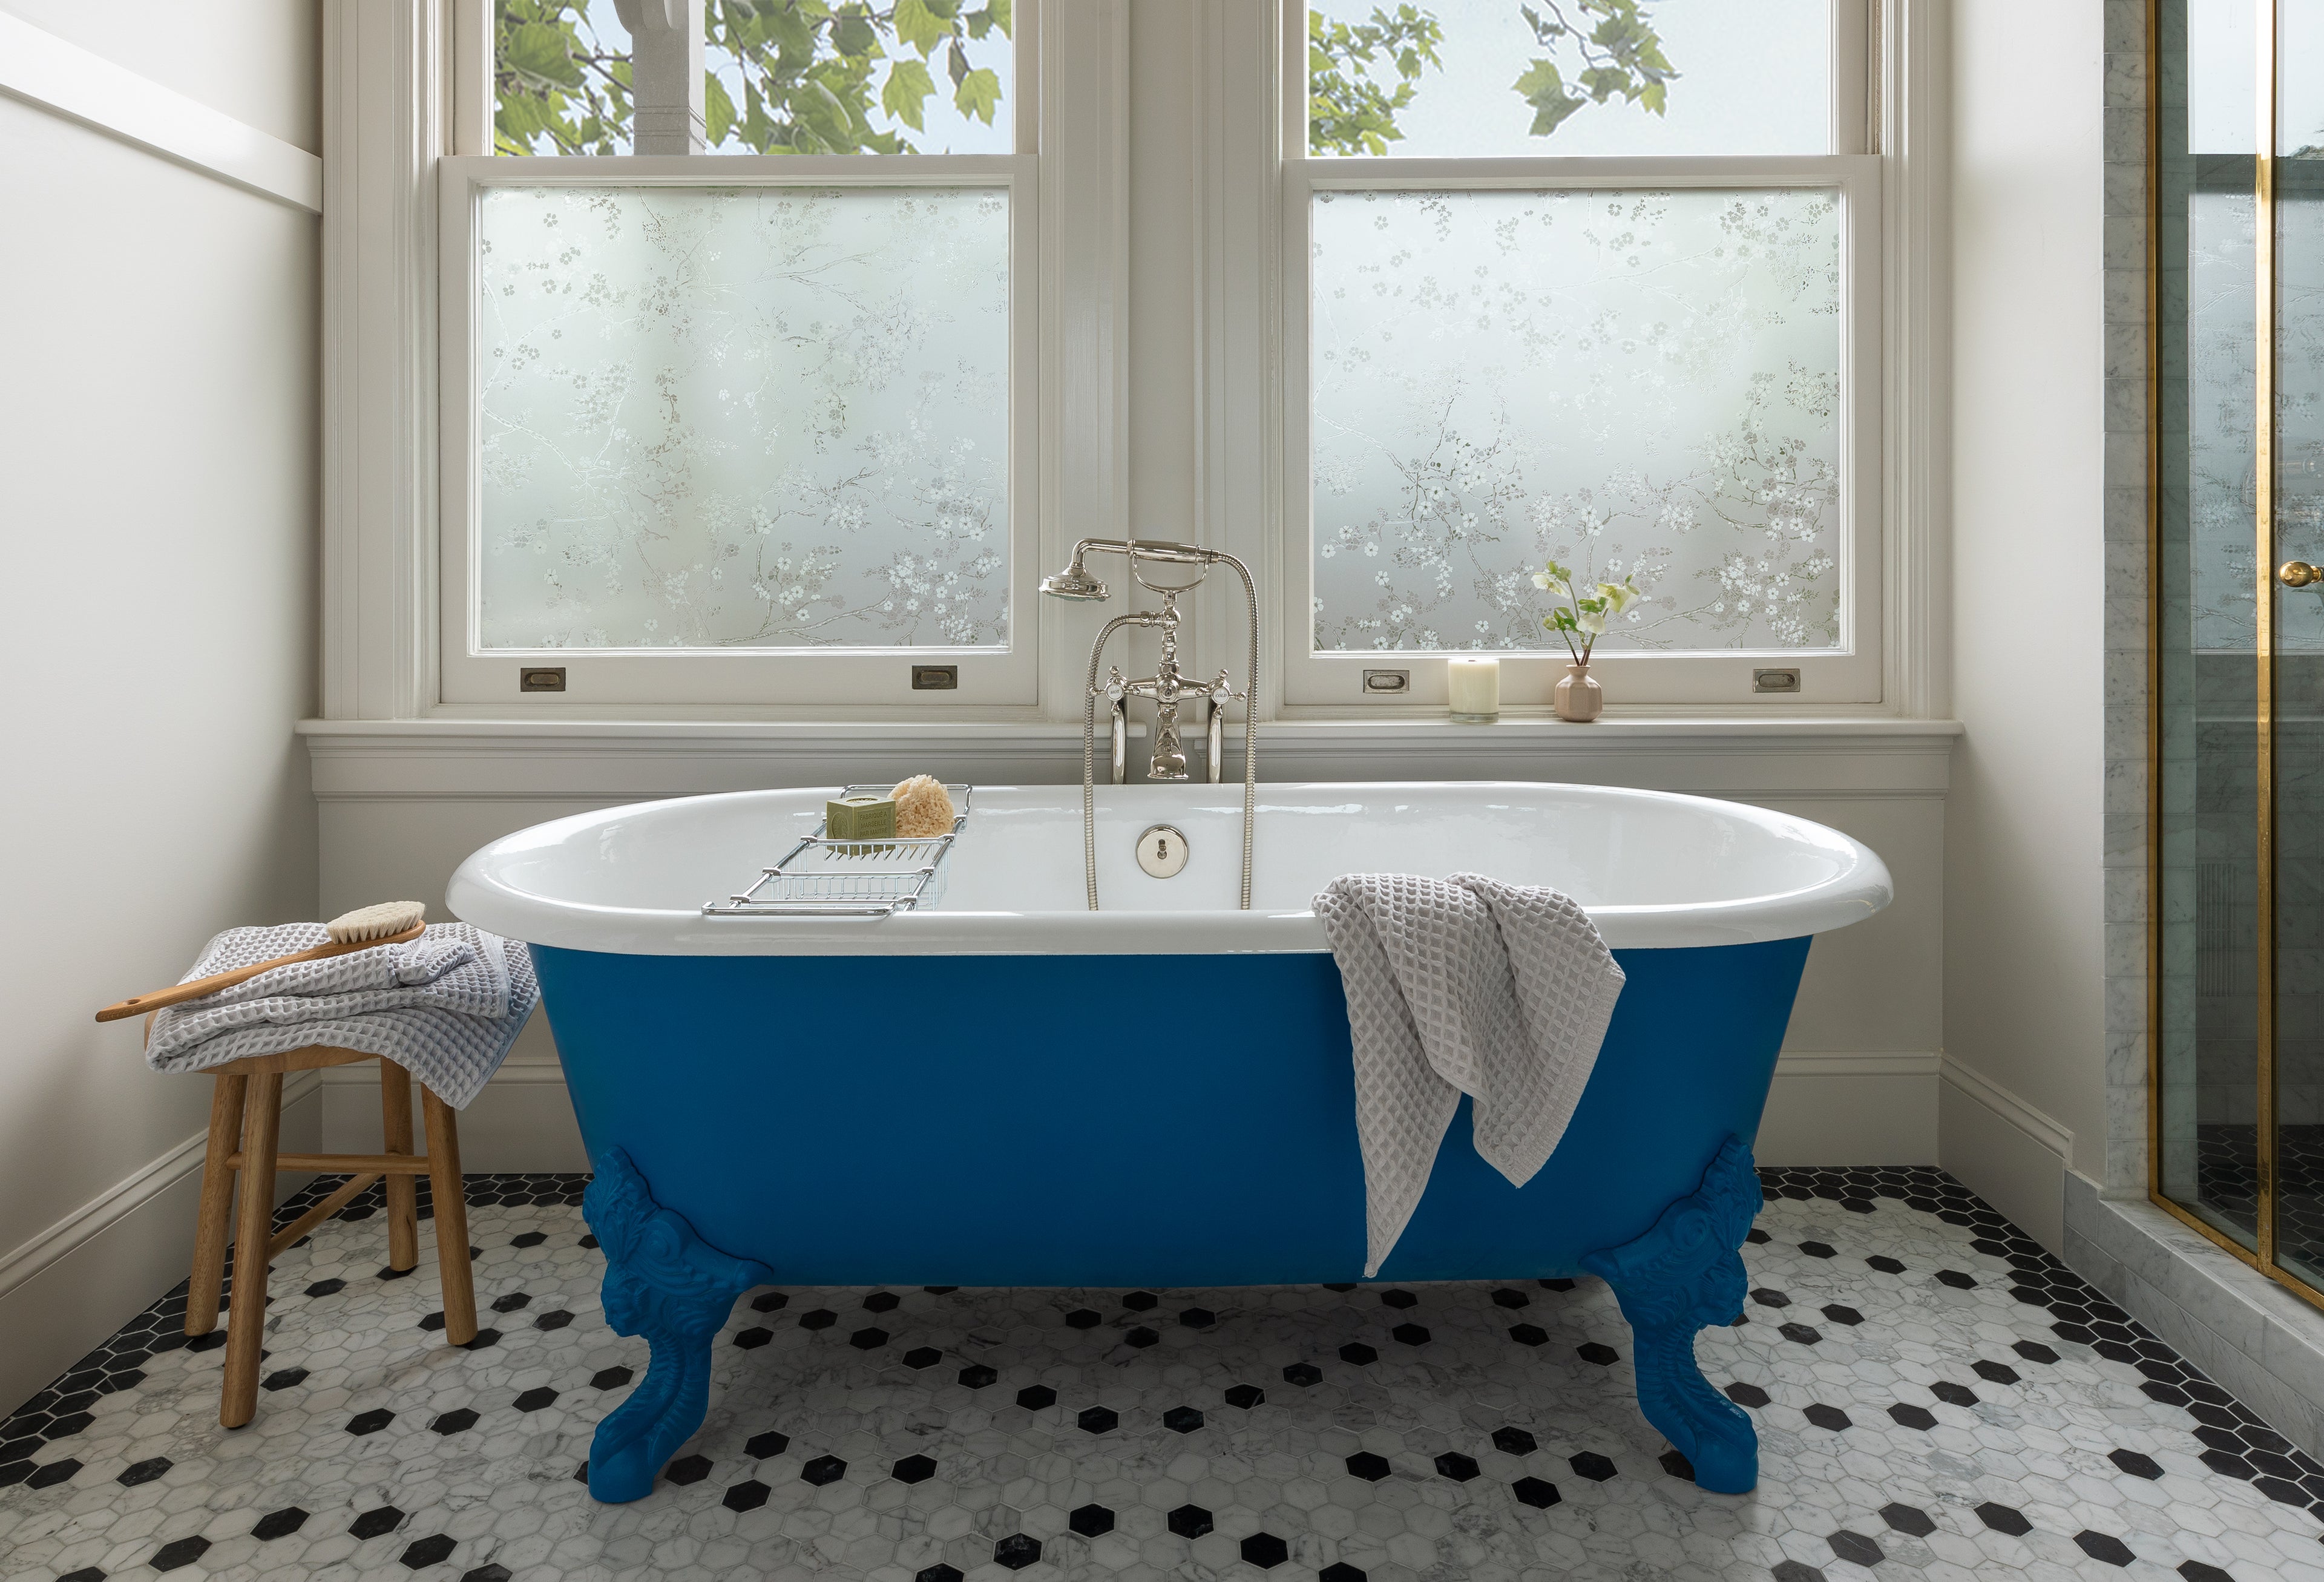 Blue bathtub in front of 2 side by side windows in bathroom in shades of white.